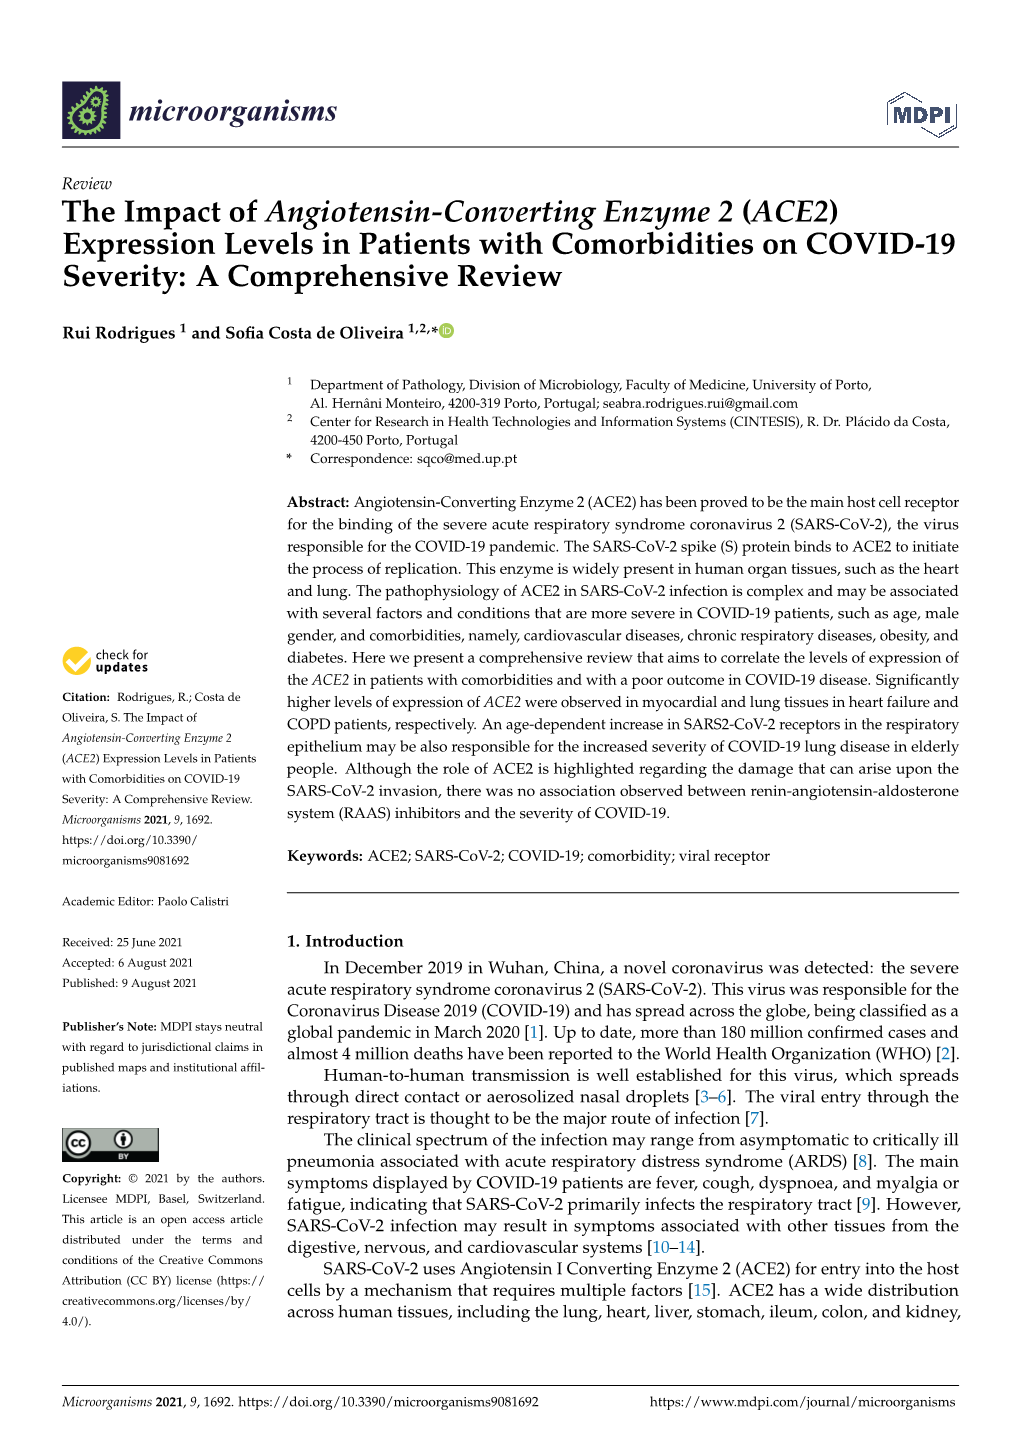 The Impact of Angiotensin-Converting Enzyme 2 (ACE2) Expression Levels in Patients with Comorbidities on COVID-19 Severity: a Comprehensive Review